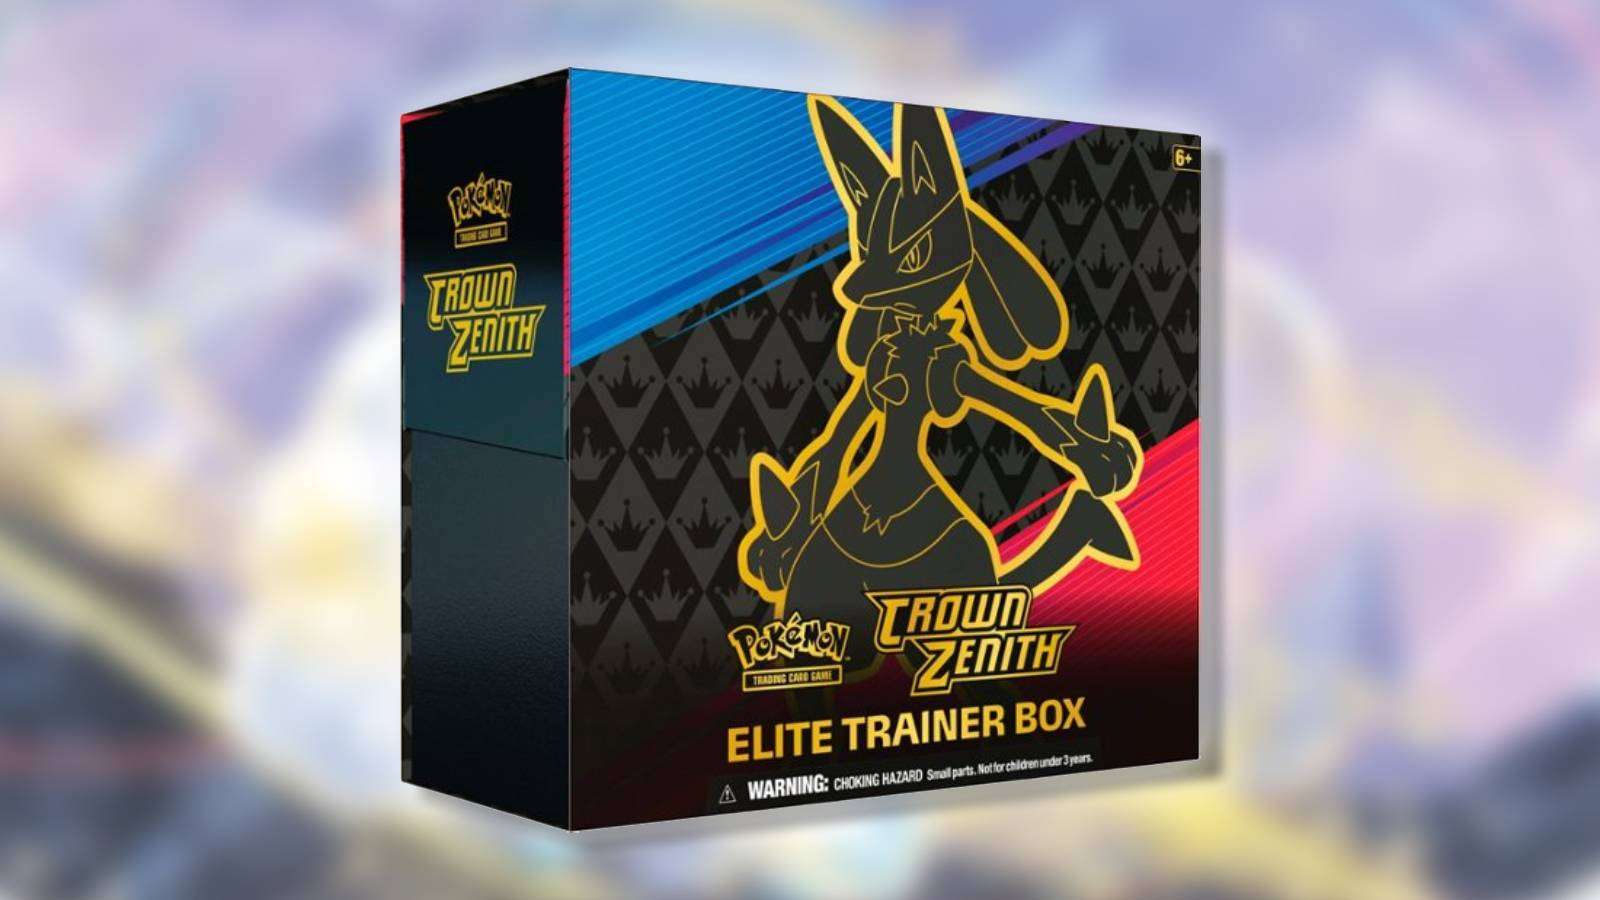 A Pokemon TCG Crown Zenith Elite Trainer box appears against a blurred background